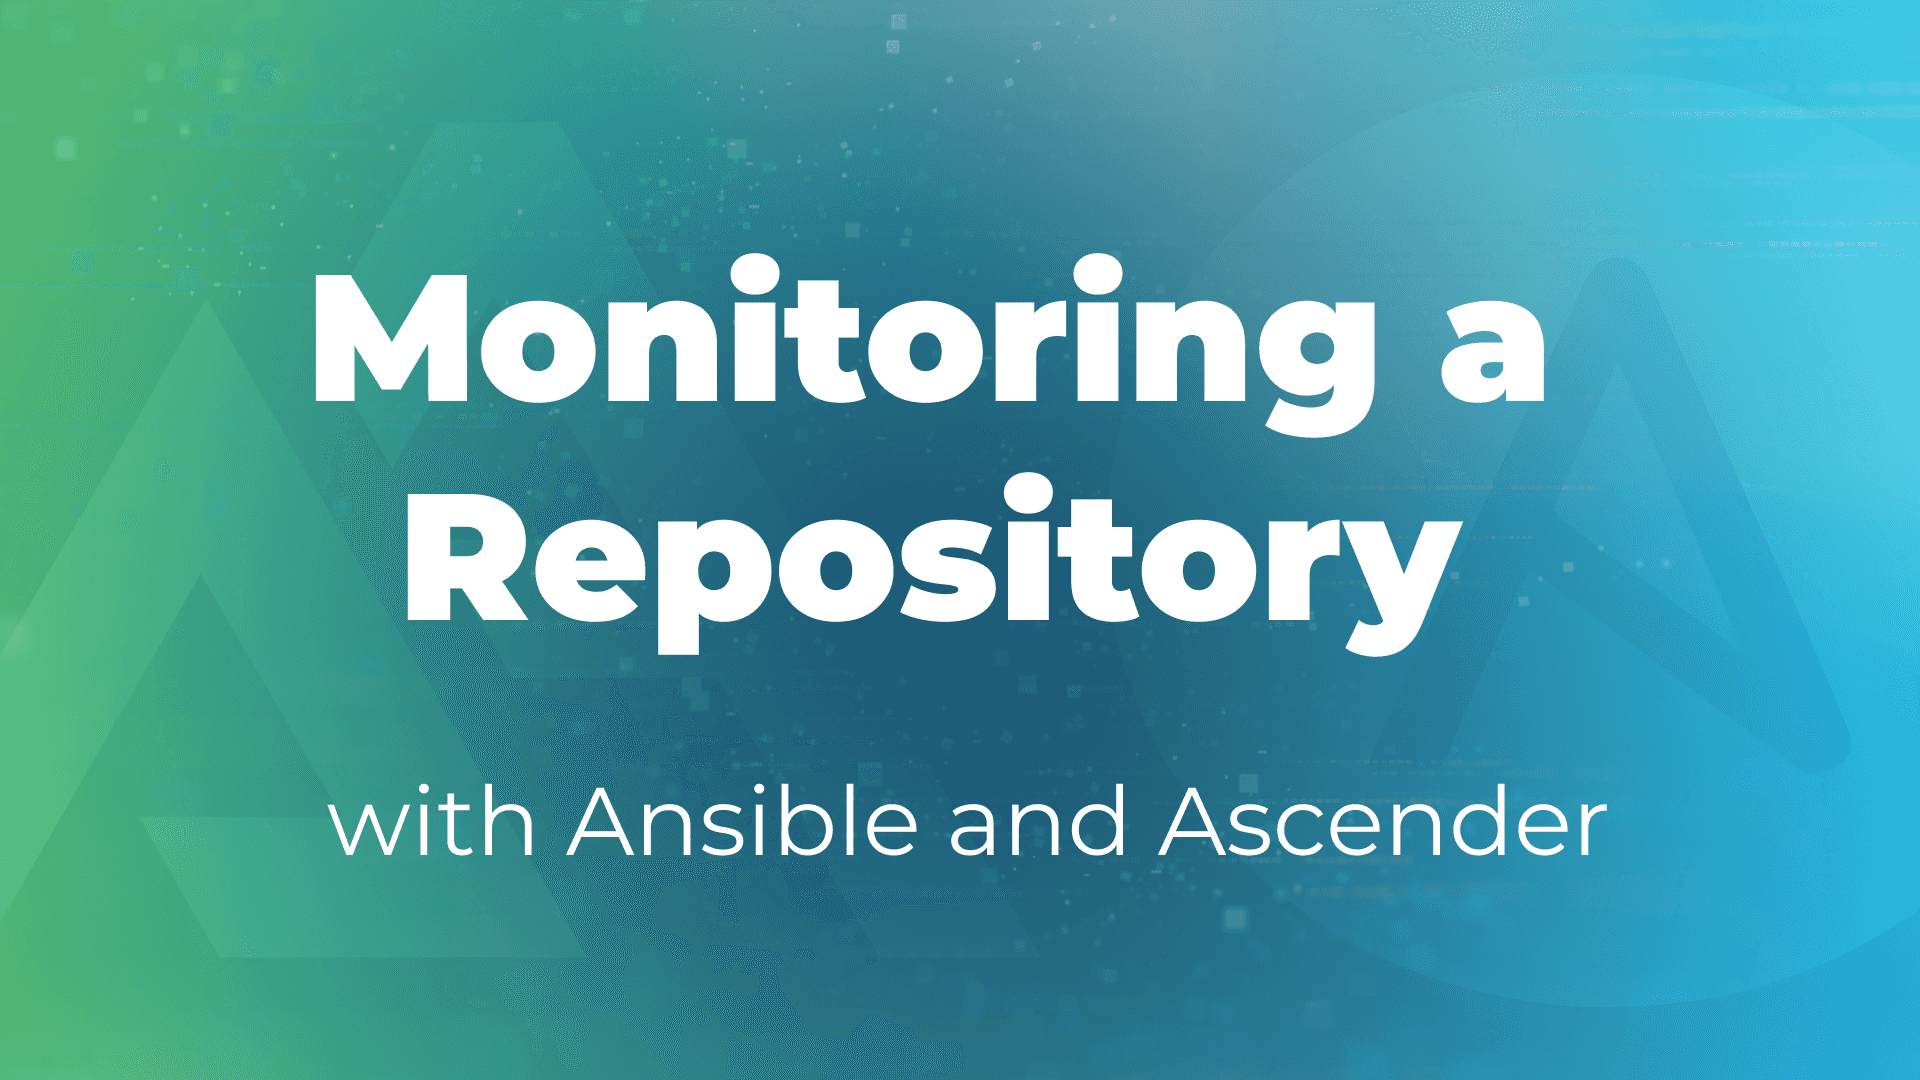 Monitoring a Repository for Changes with Ansible and Ascender